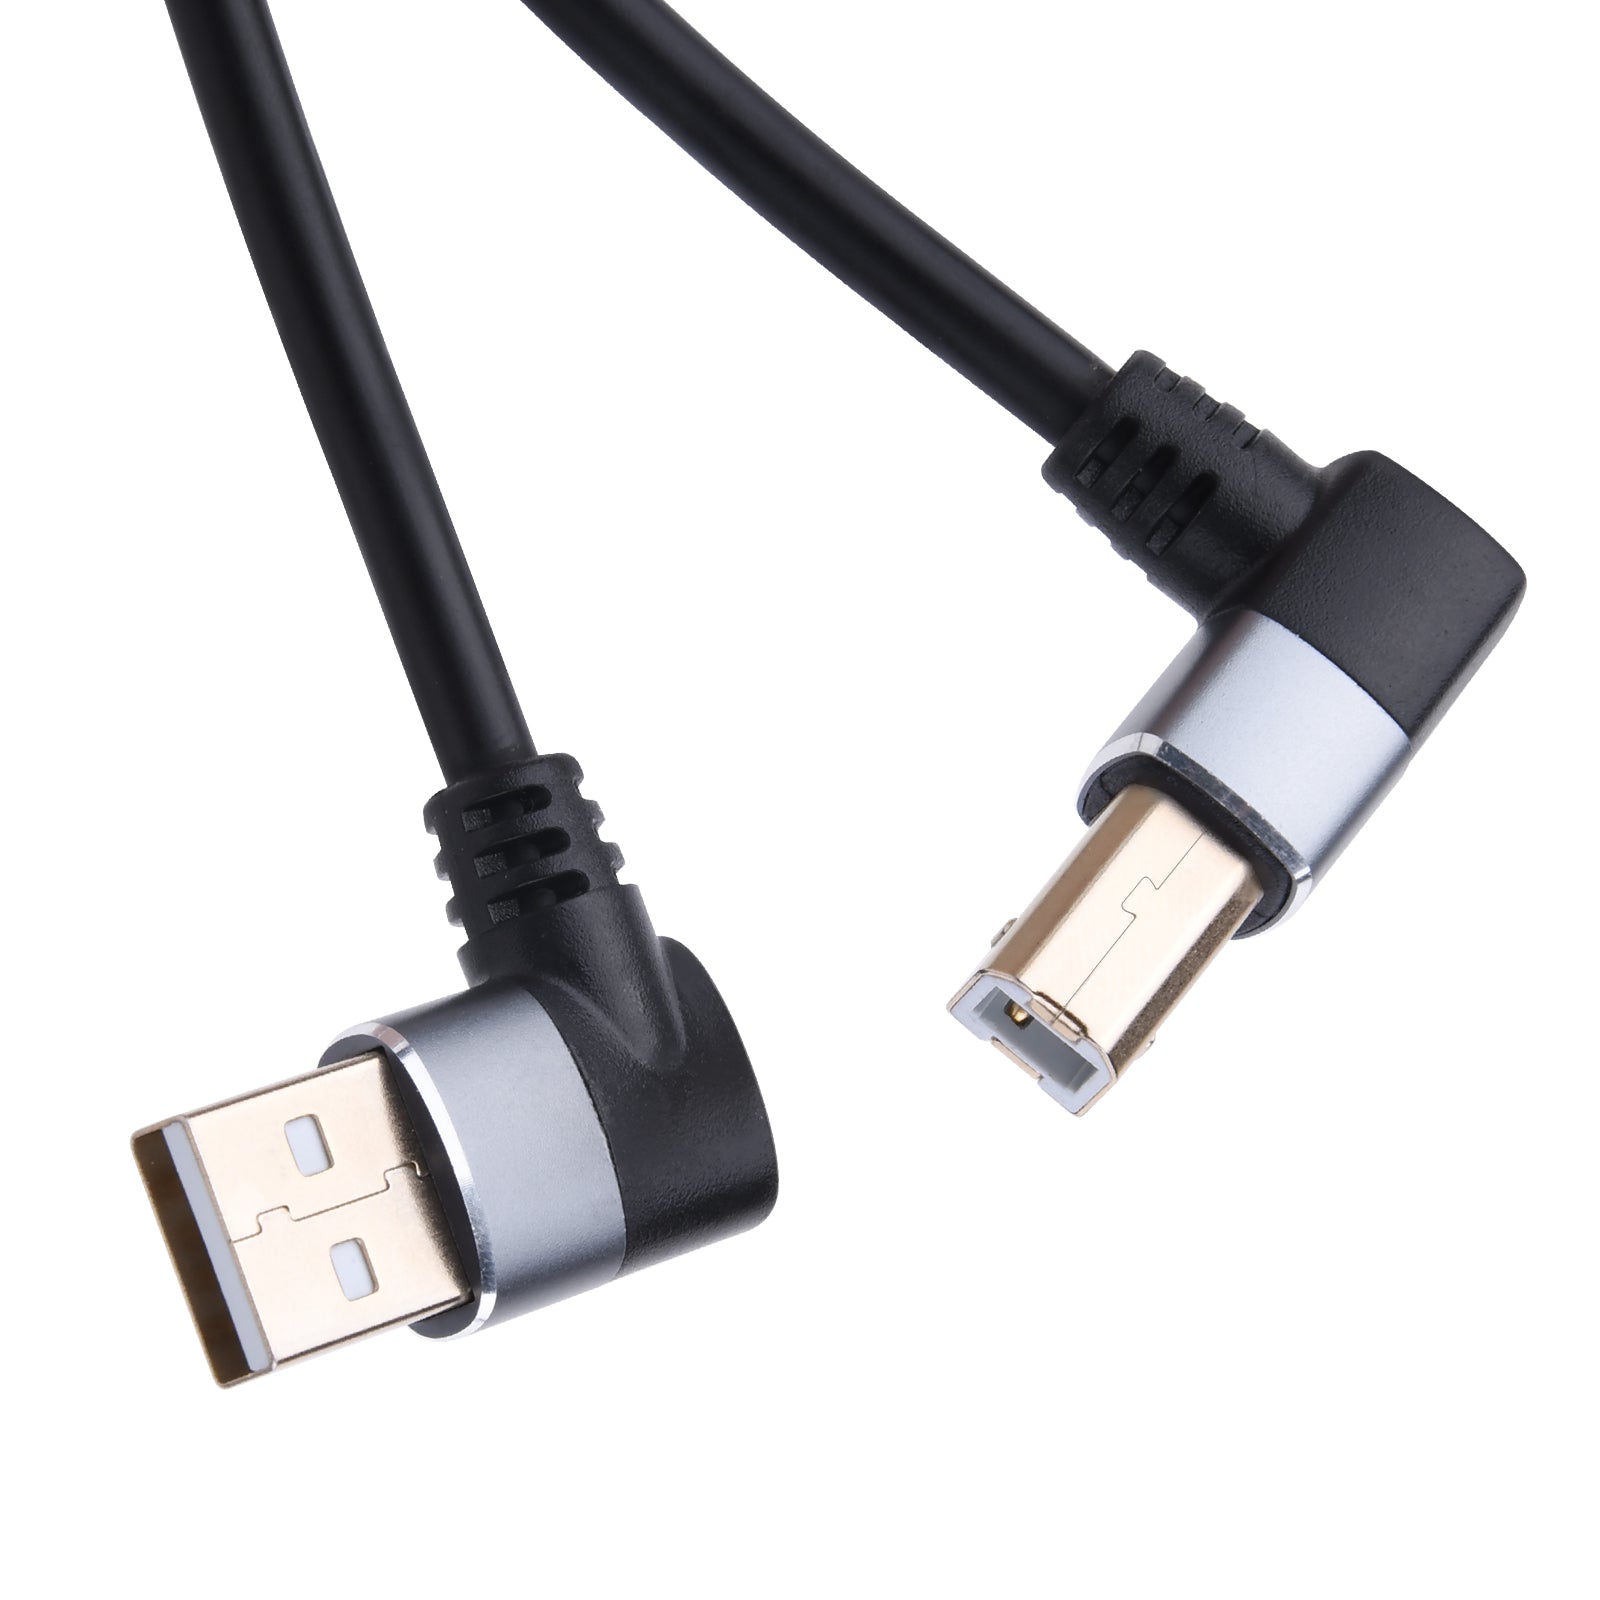 USB-A 2.0 A-Male to USB-B Male Angled Printer Cable with Gold Plated Connector